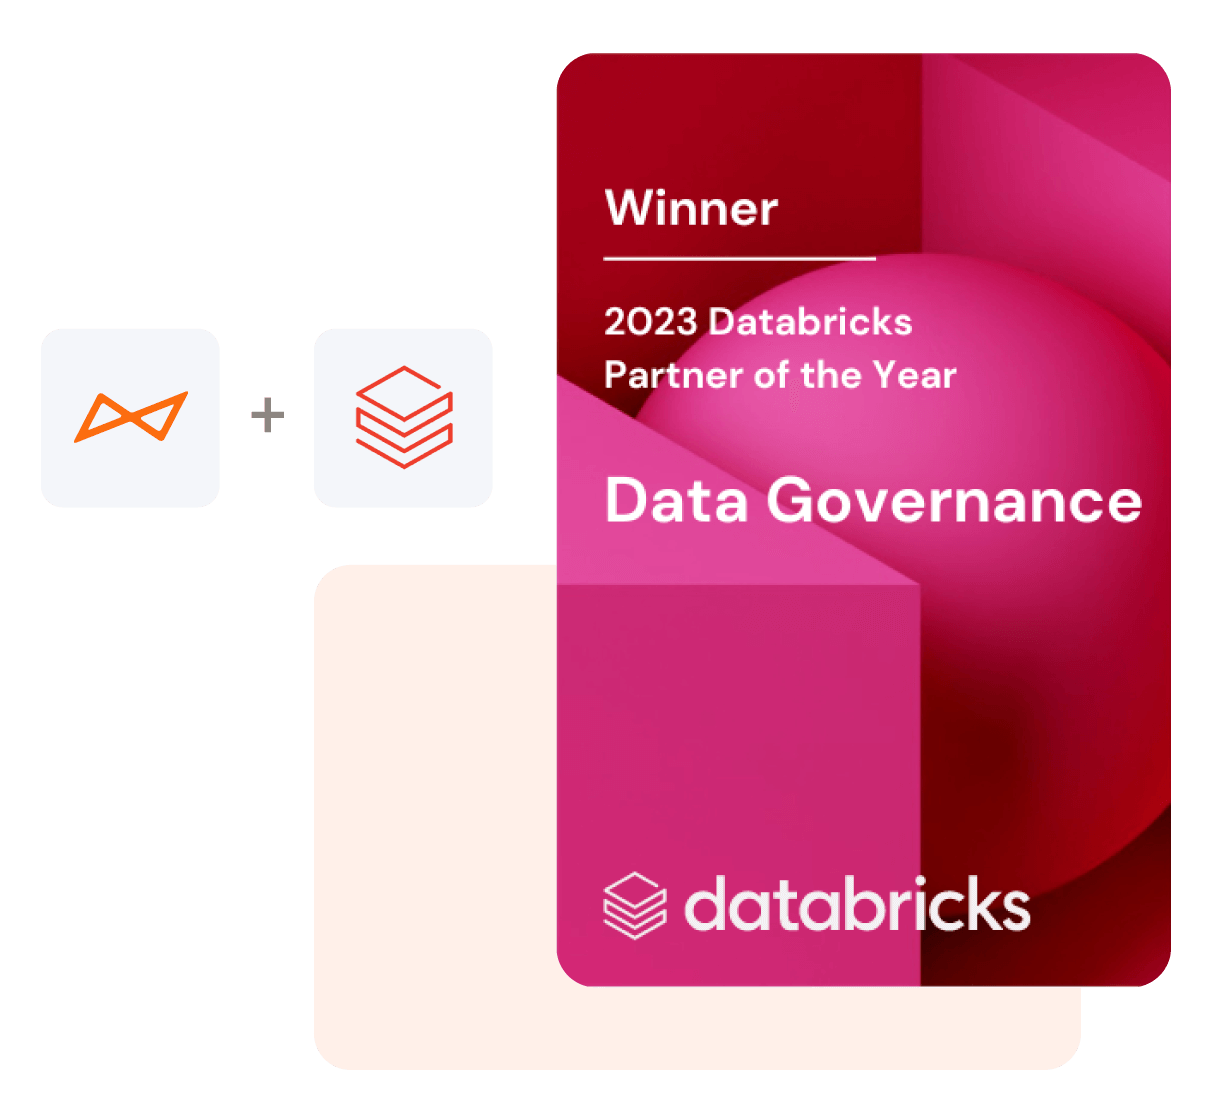 Databricks 2023 Partner of the Year Award given to Alation